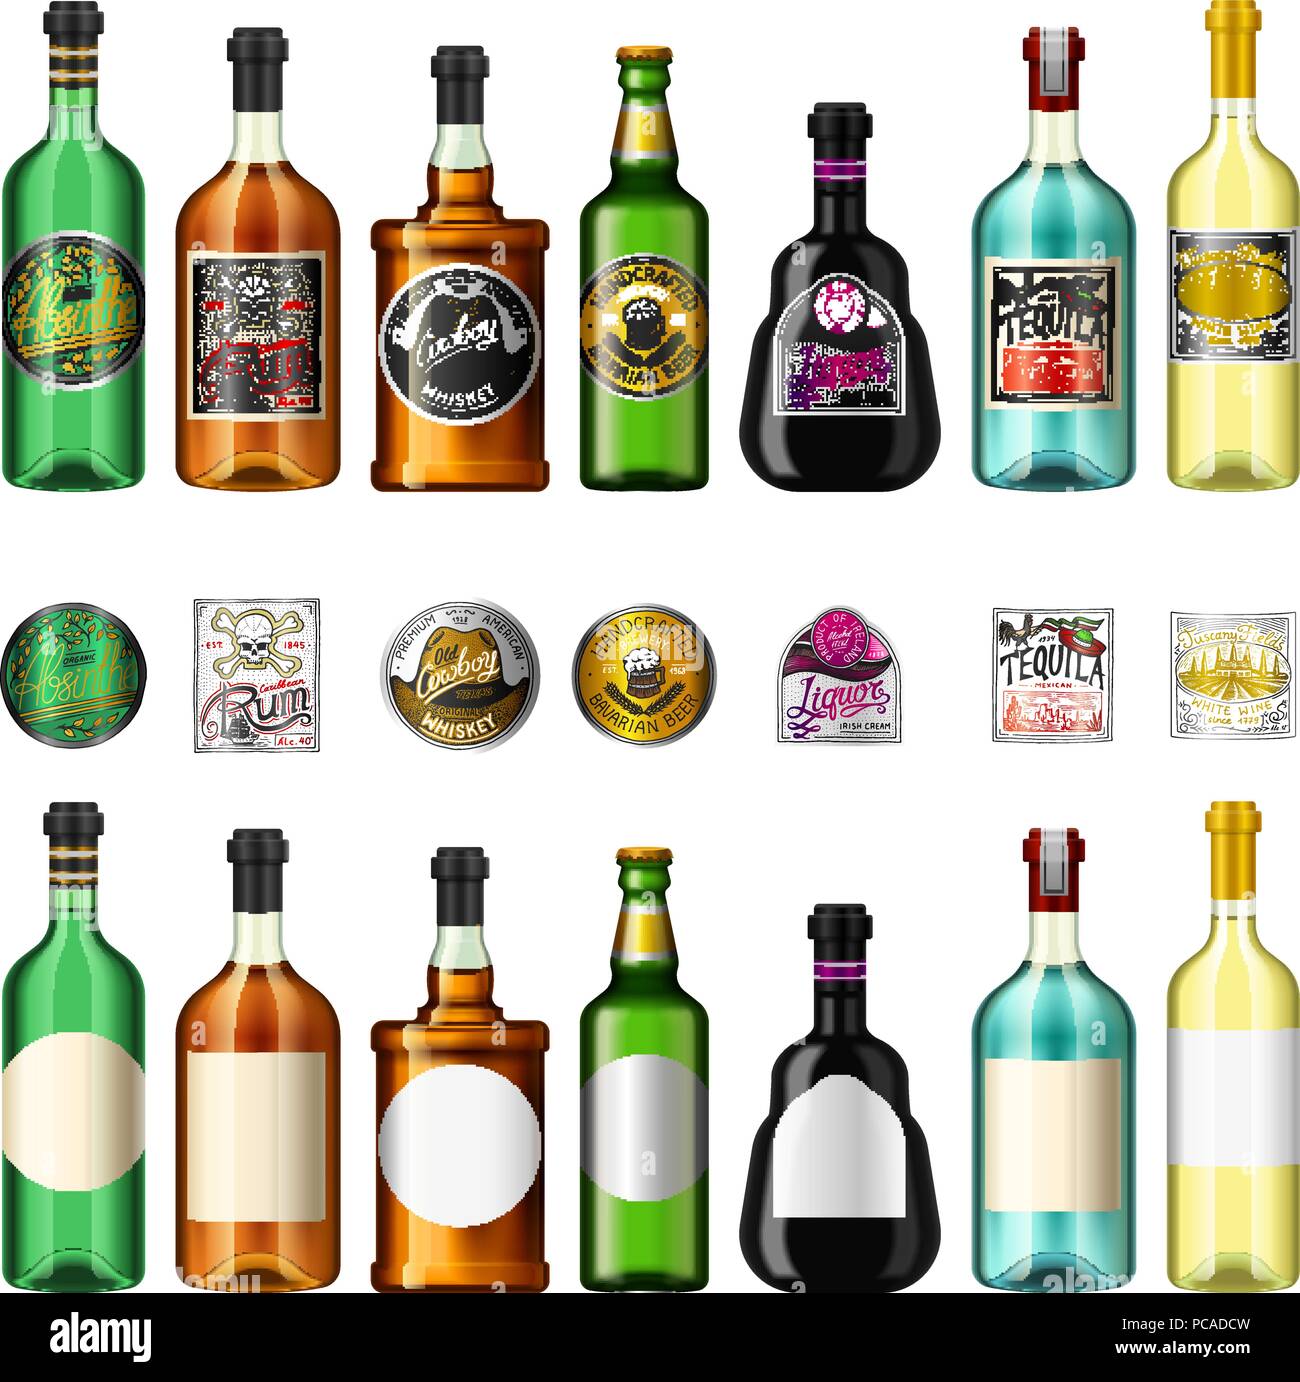 Alcohol Drinks In A Bottle With Different Vintage Labels